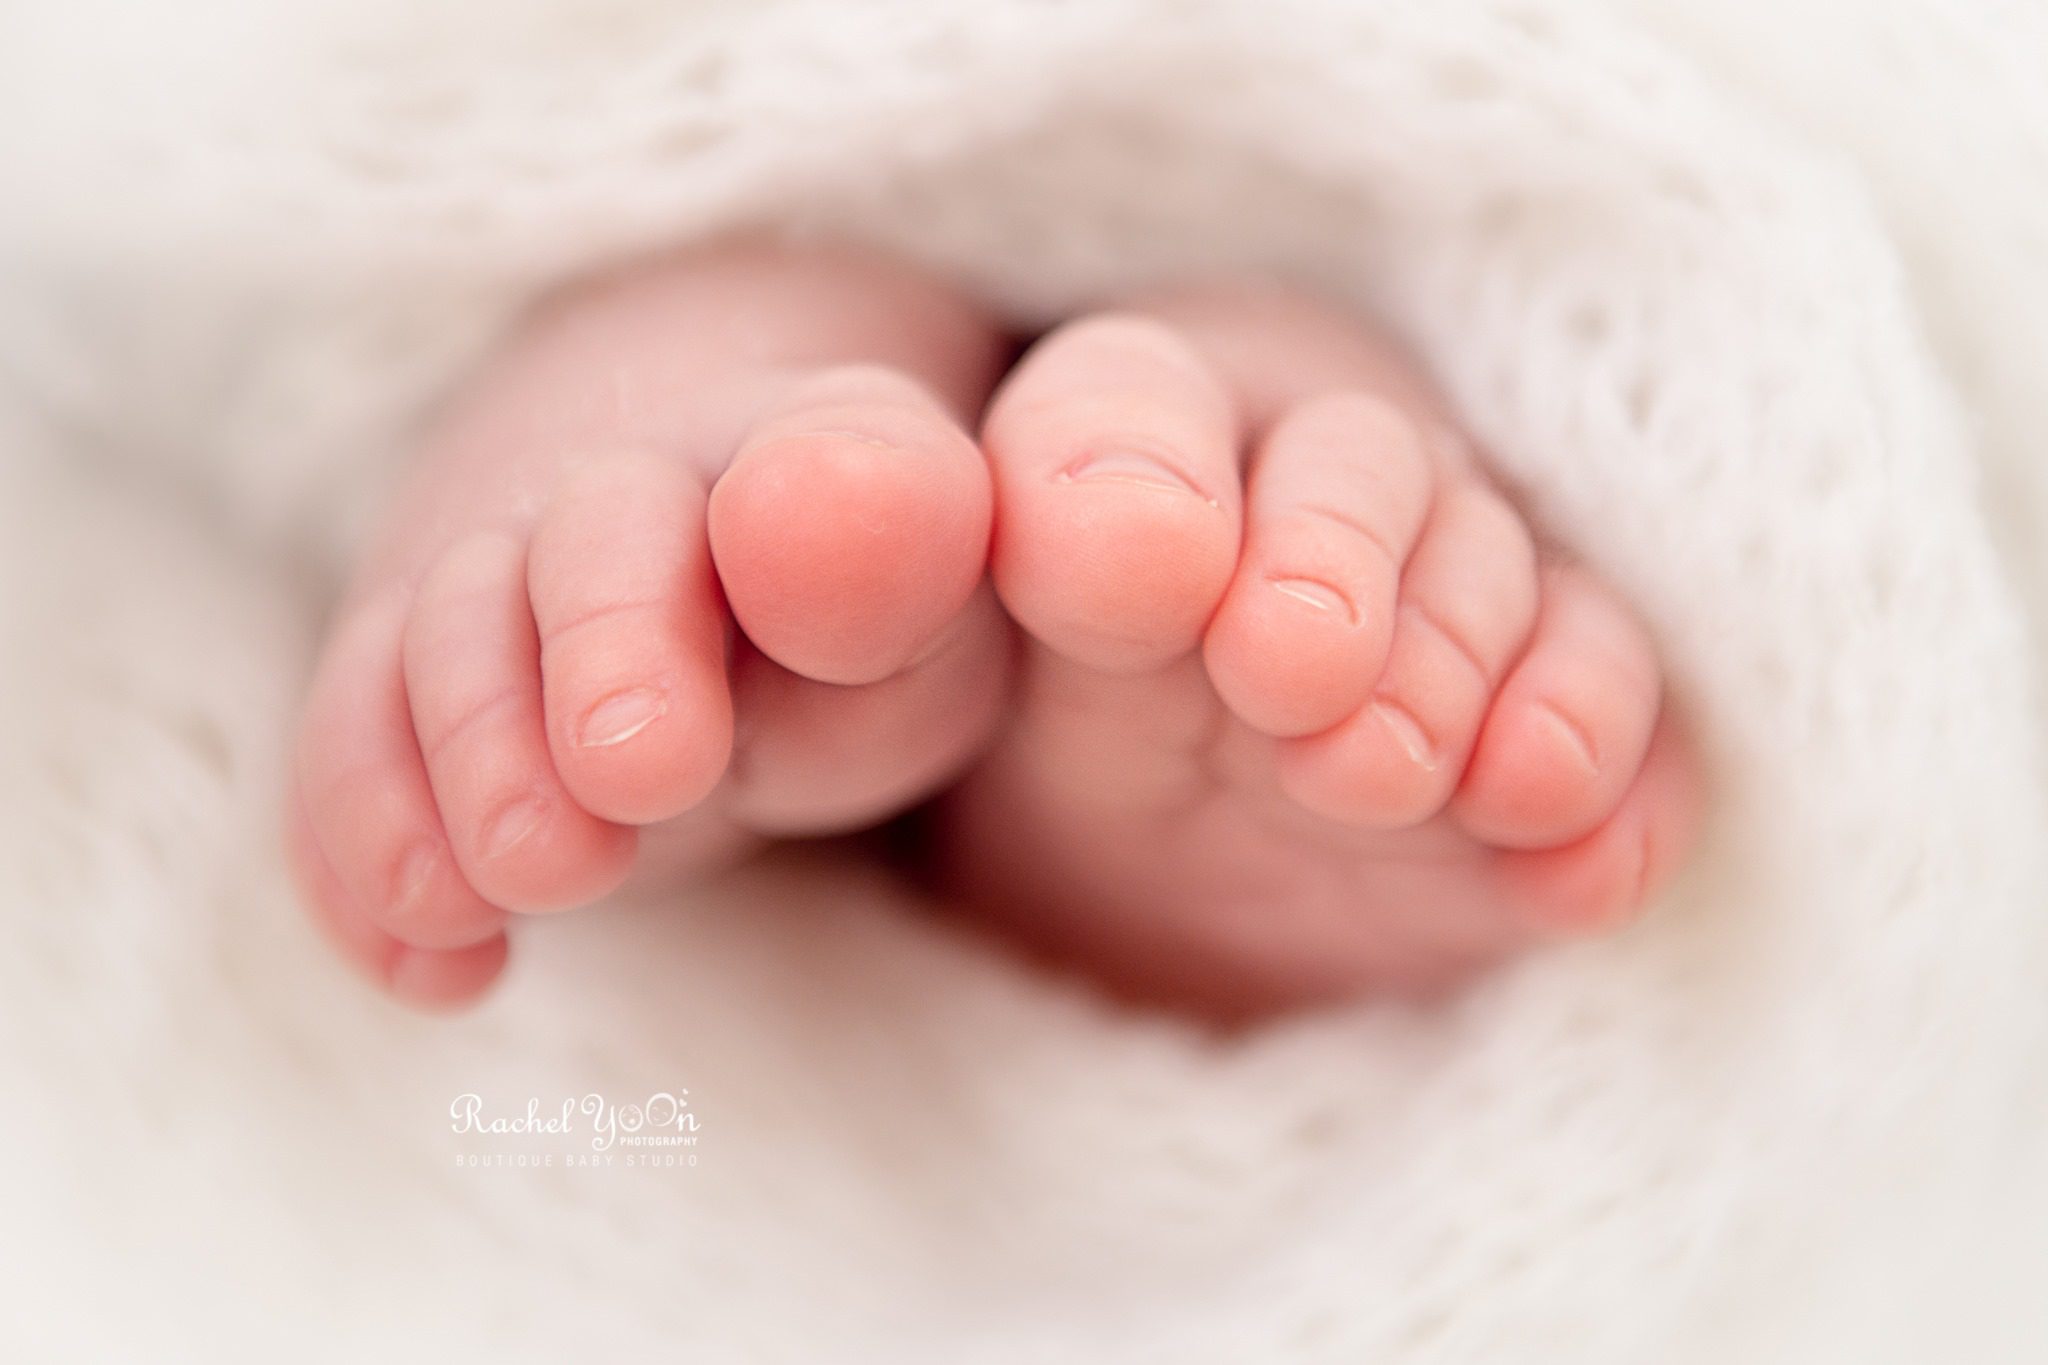 newborn photography vancouver - taking photos of newborn baby at home - baby toes